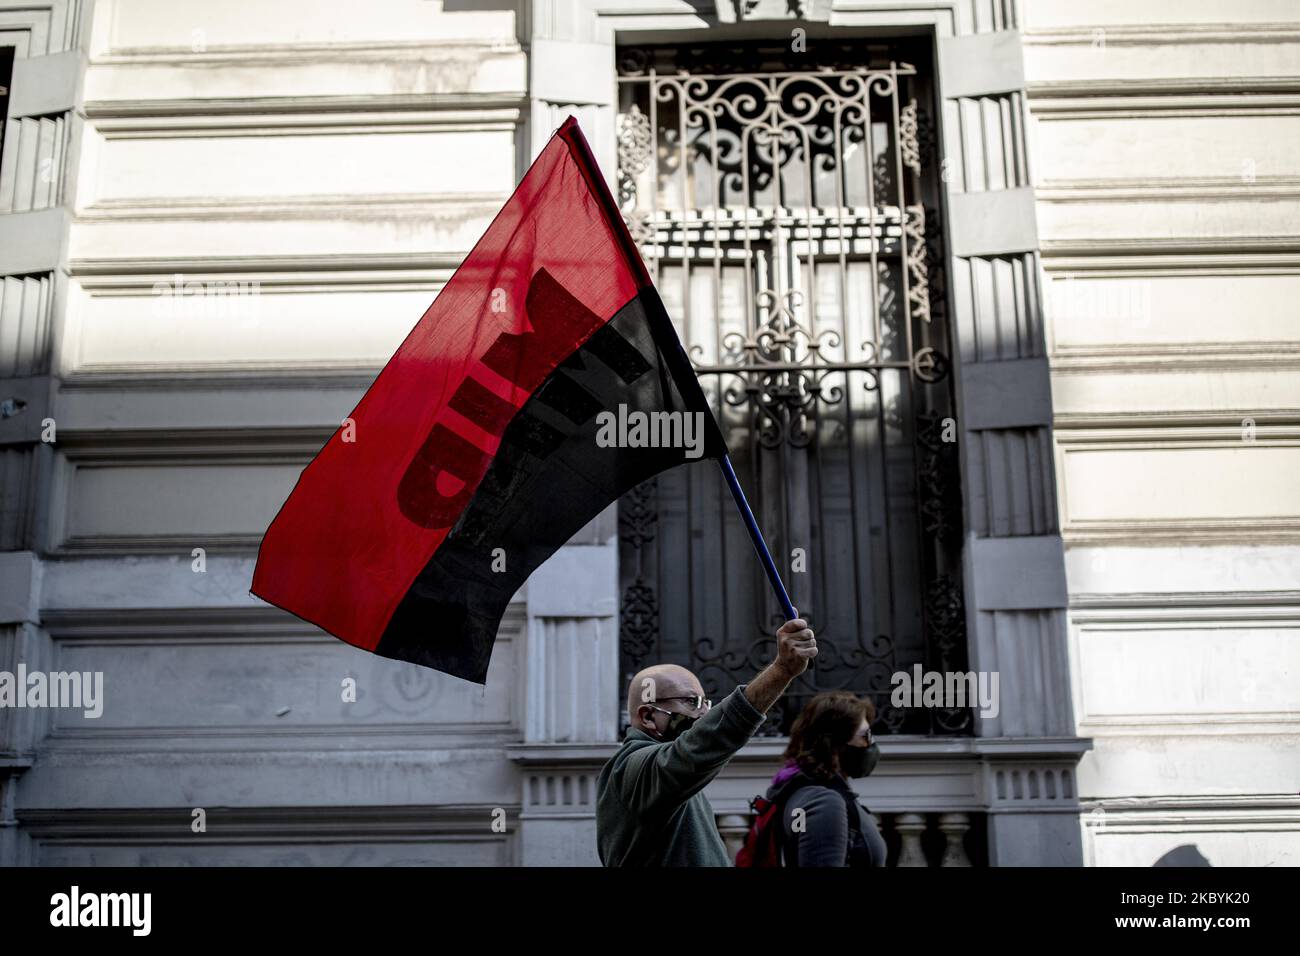 A demonstrator holds a flag during a protest on the 47th anniversary of the last military coup that ousted President Salvador Allende on September 11, 2020 in Santiago, Chile. The military coup led by General Augusto Pinochet in 1973 imposed a dictatorship that lasted until 1990. (Photo by Felipe Vargas Figueroa/NurPhoto) Stock Photo